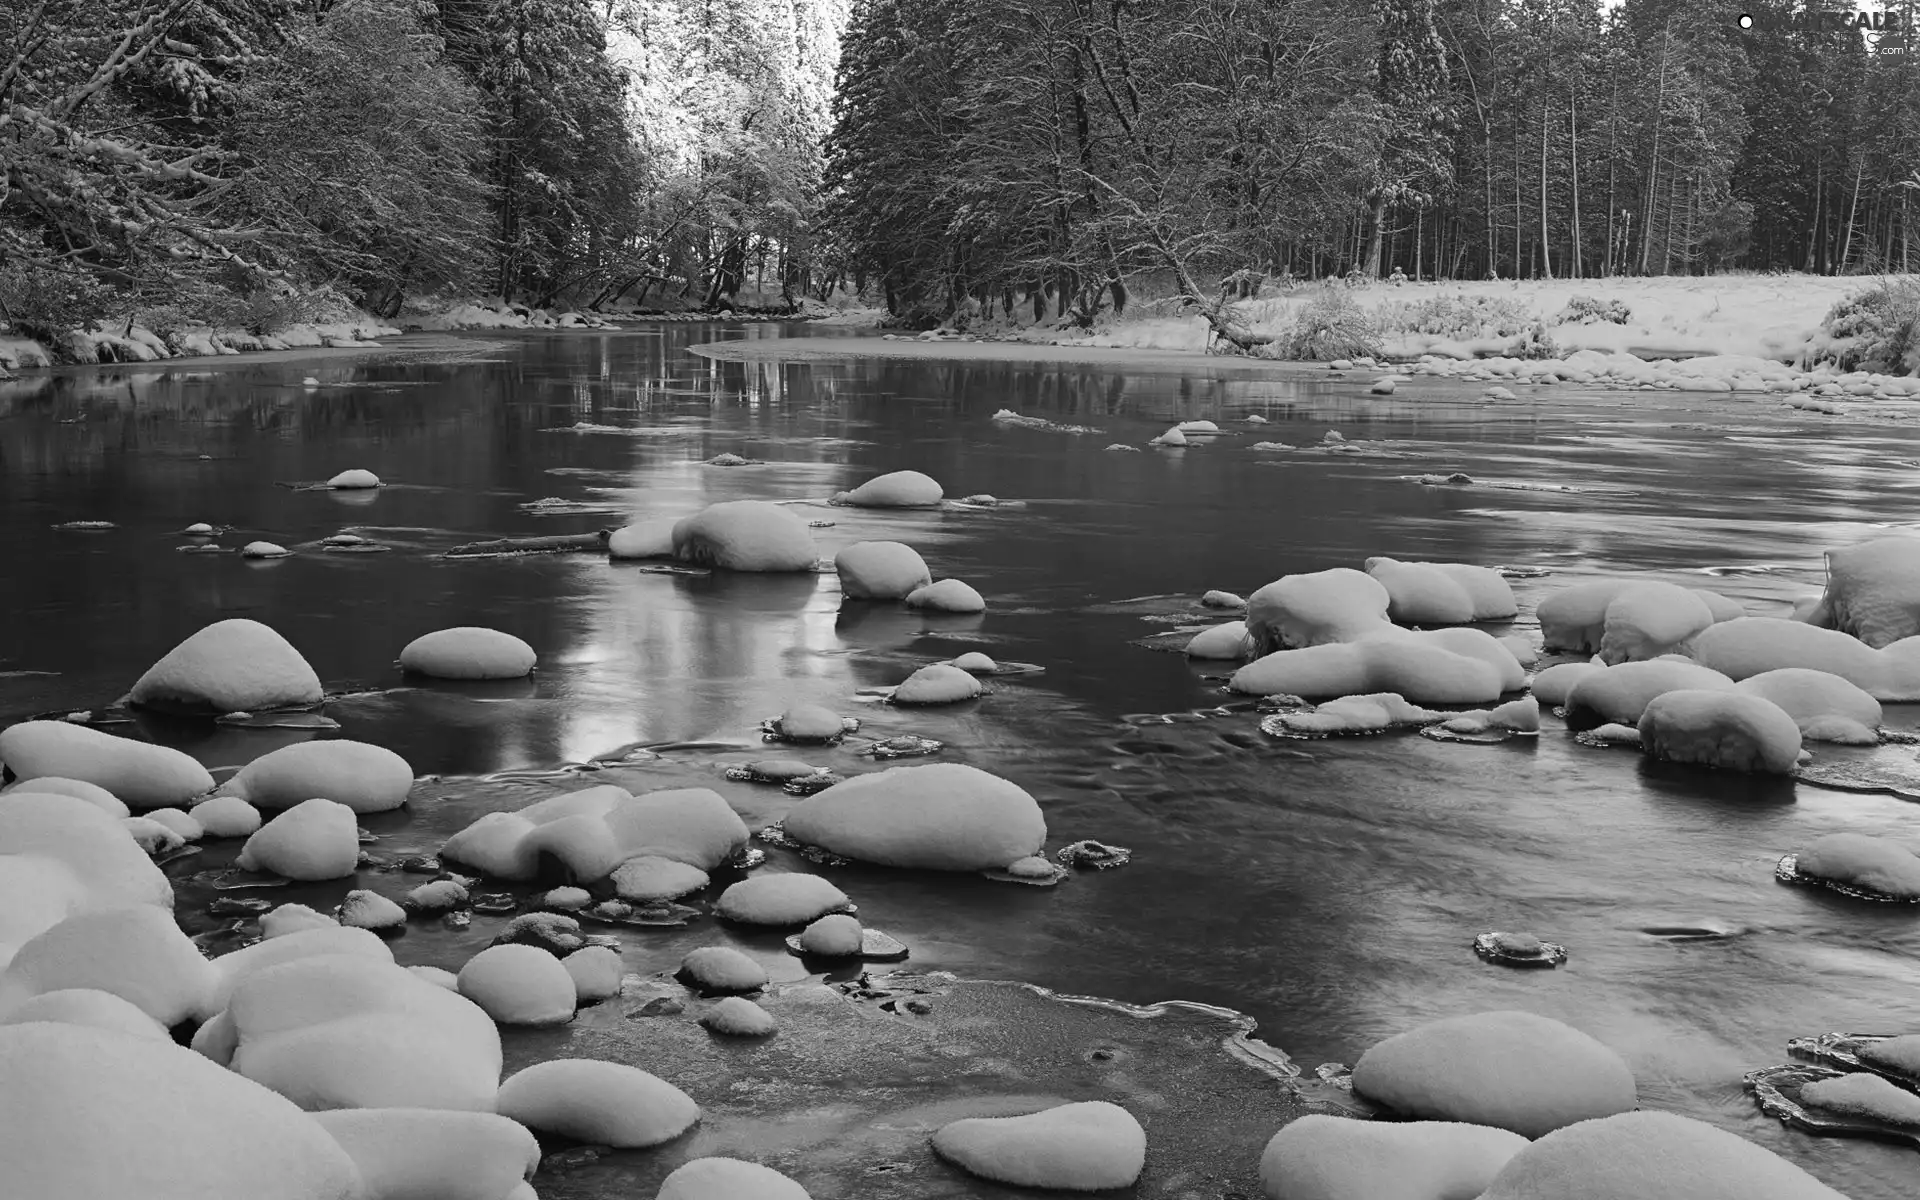 River, forest, winter, Stones